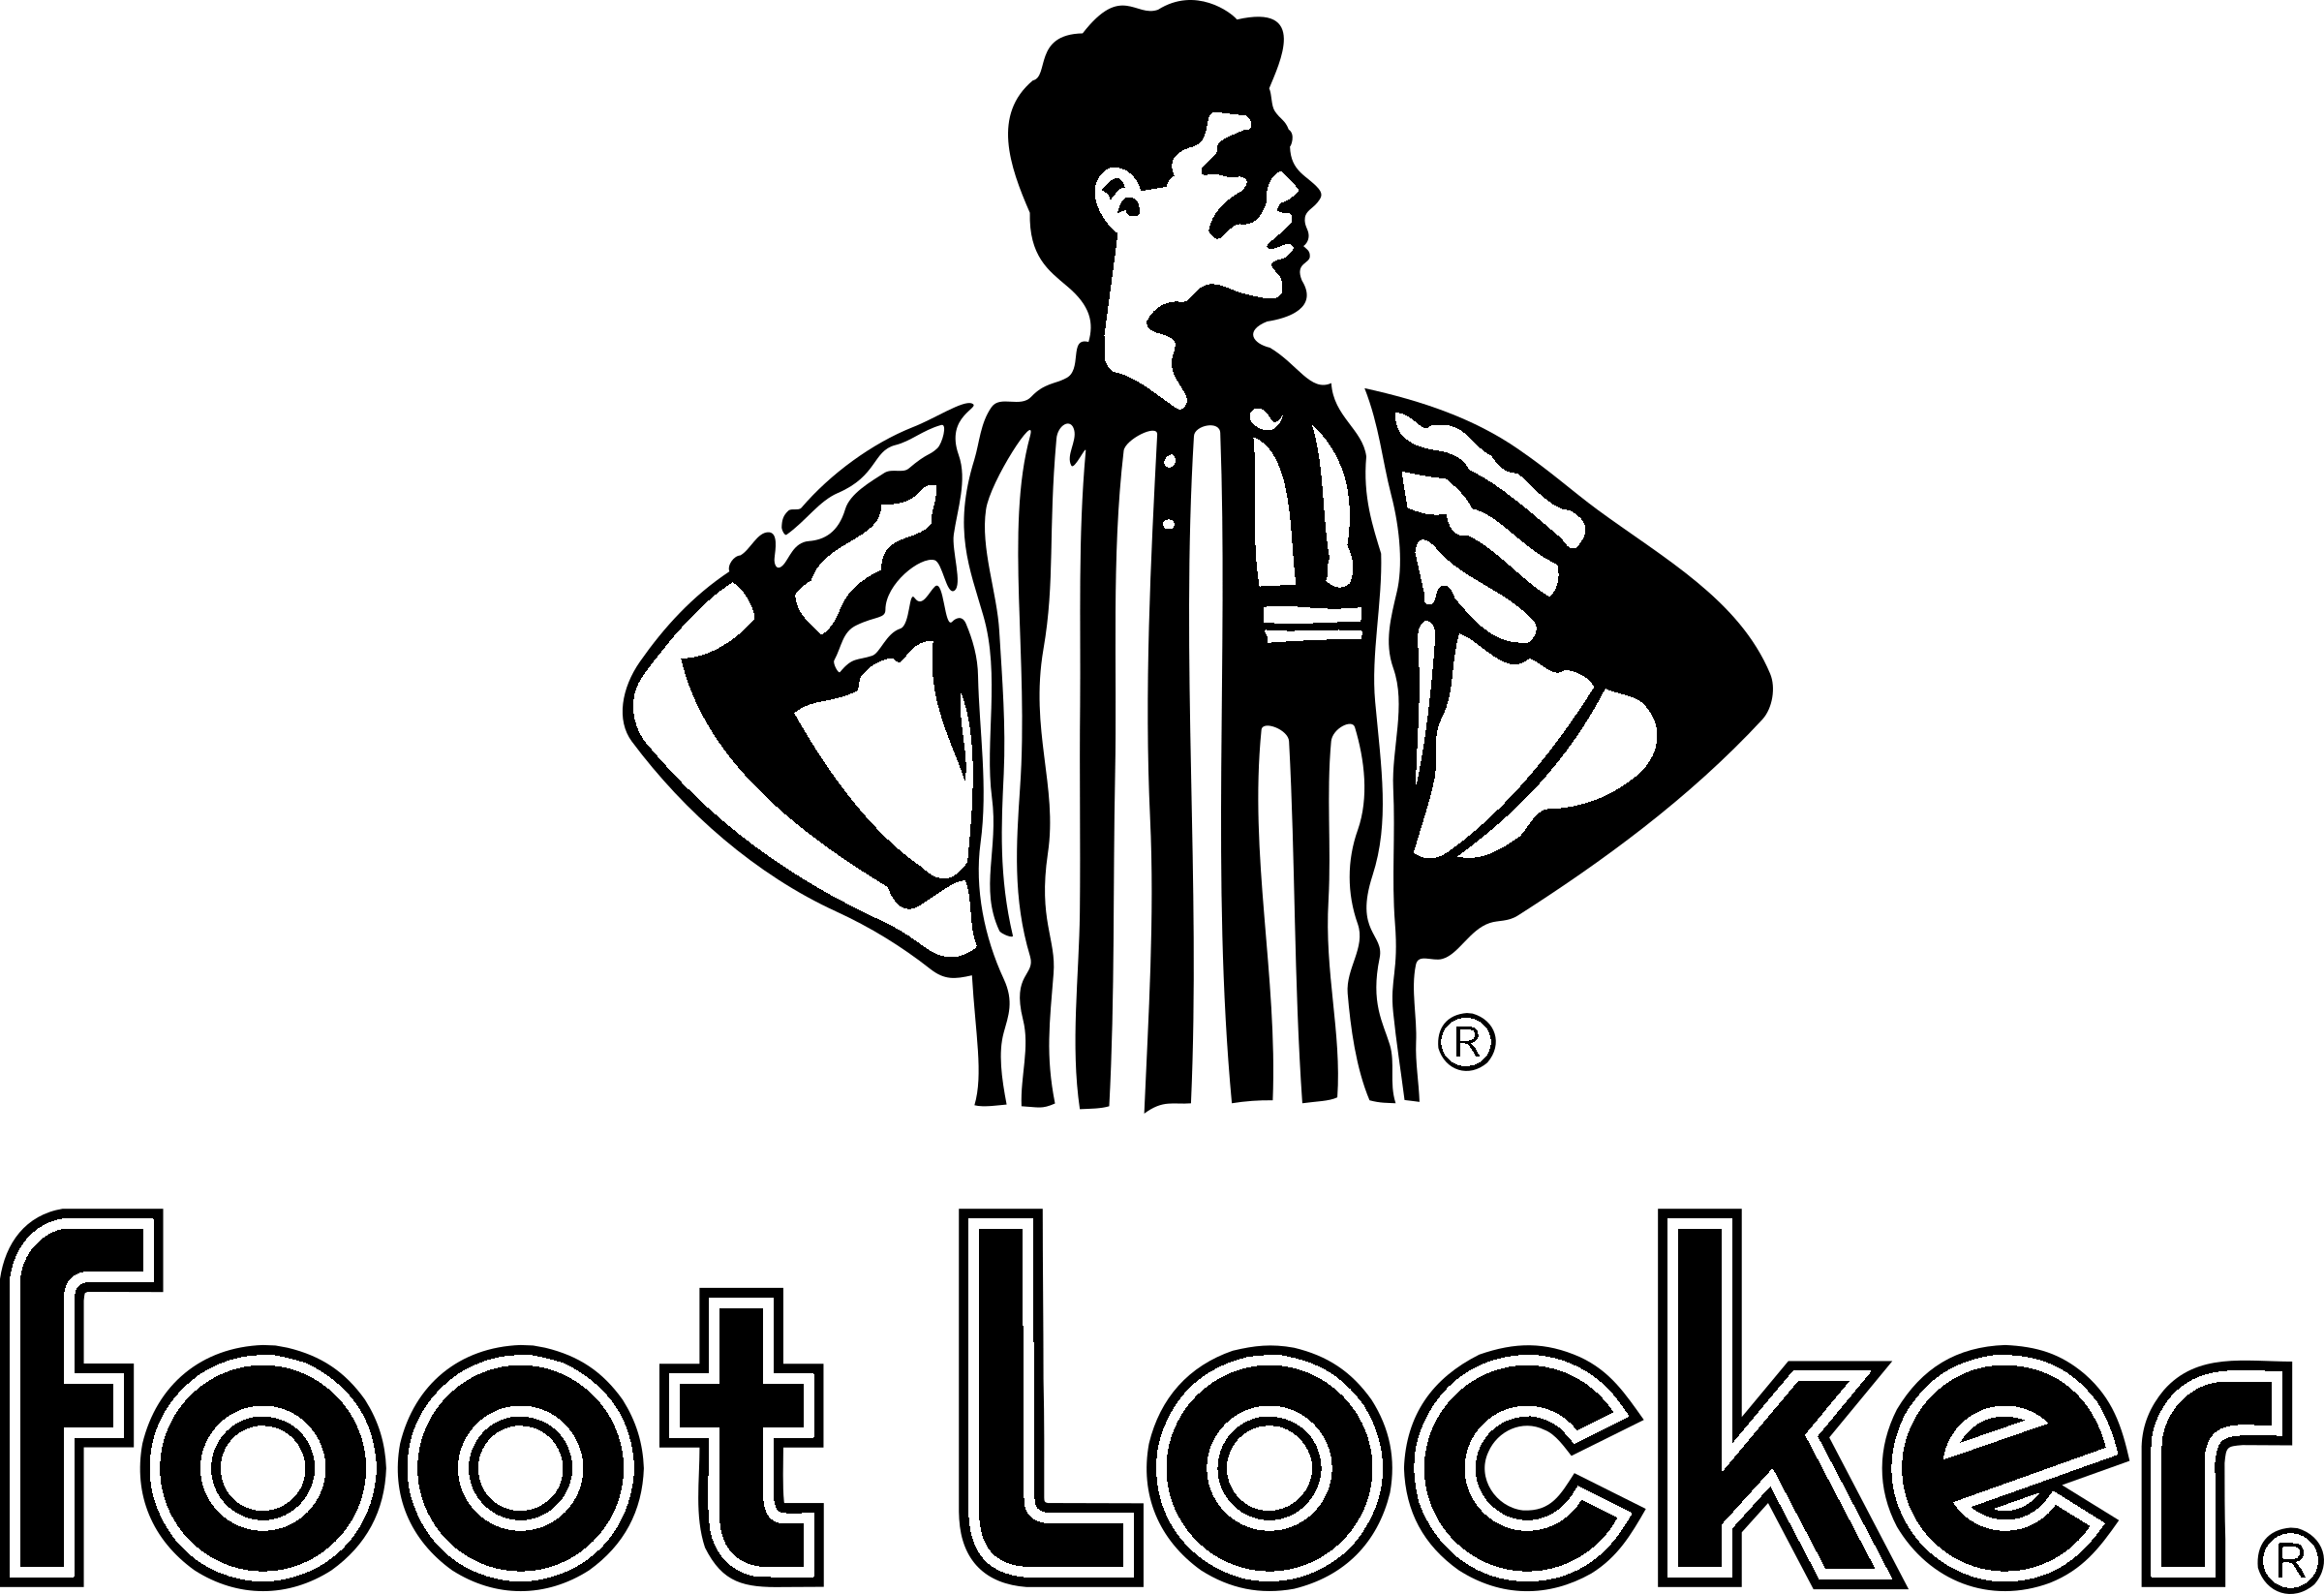 Foot and White with Wing Logo - Foot Locker Logo PNG Transparent & SVG Vector - Freebie Supply